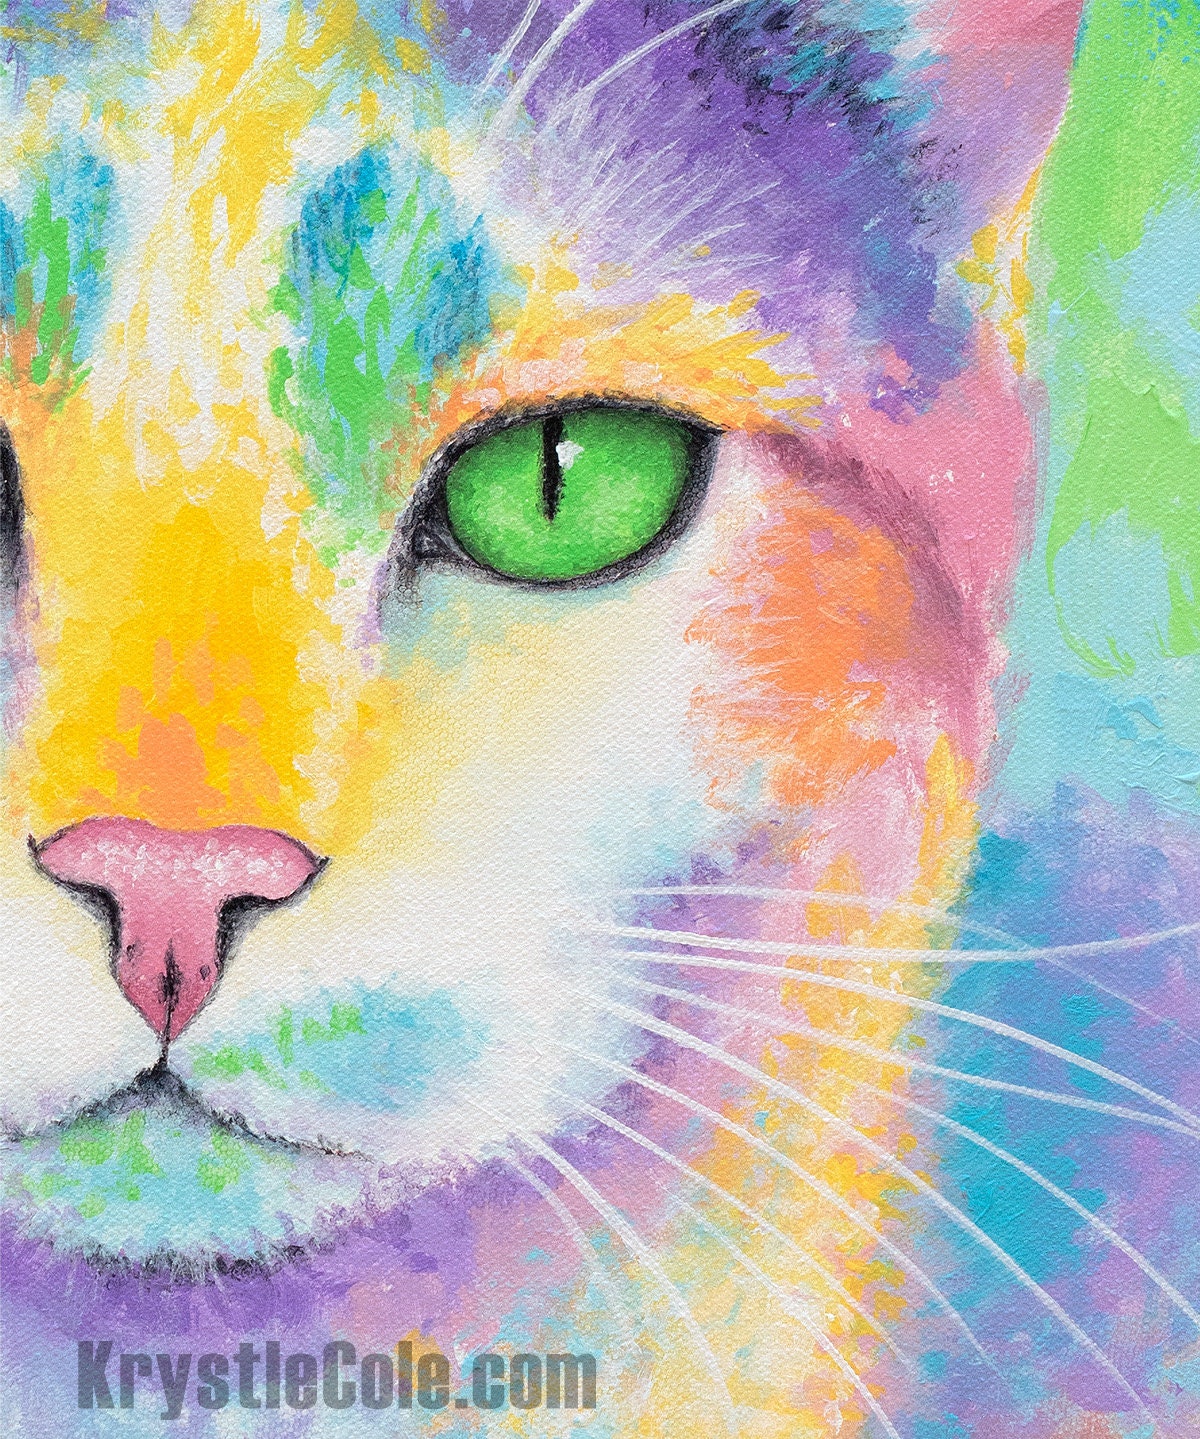 Cat Painting - Colorful Cat Art Print on CANVAS or PAPER by Krystle Cole